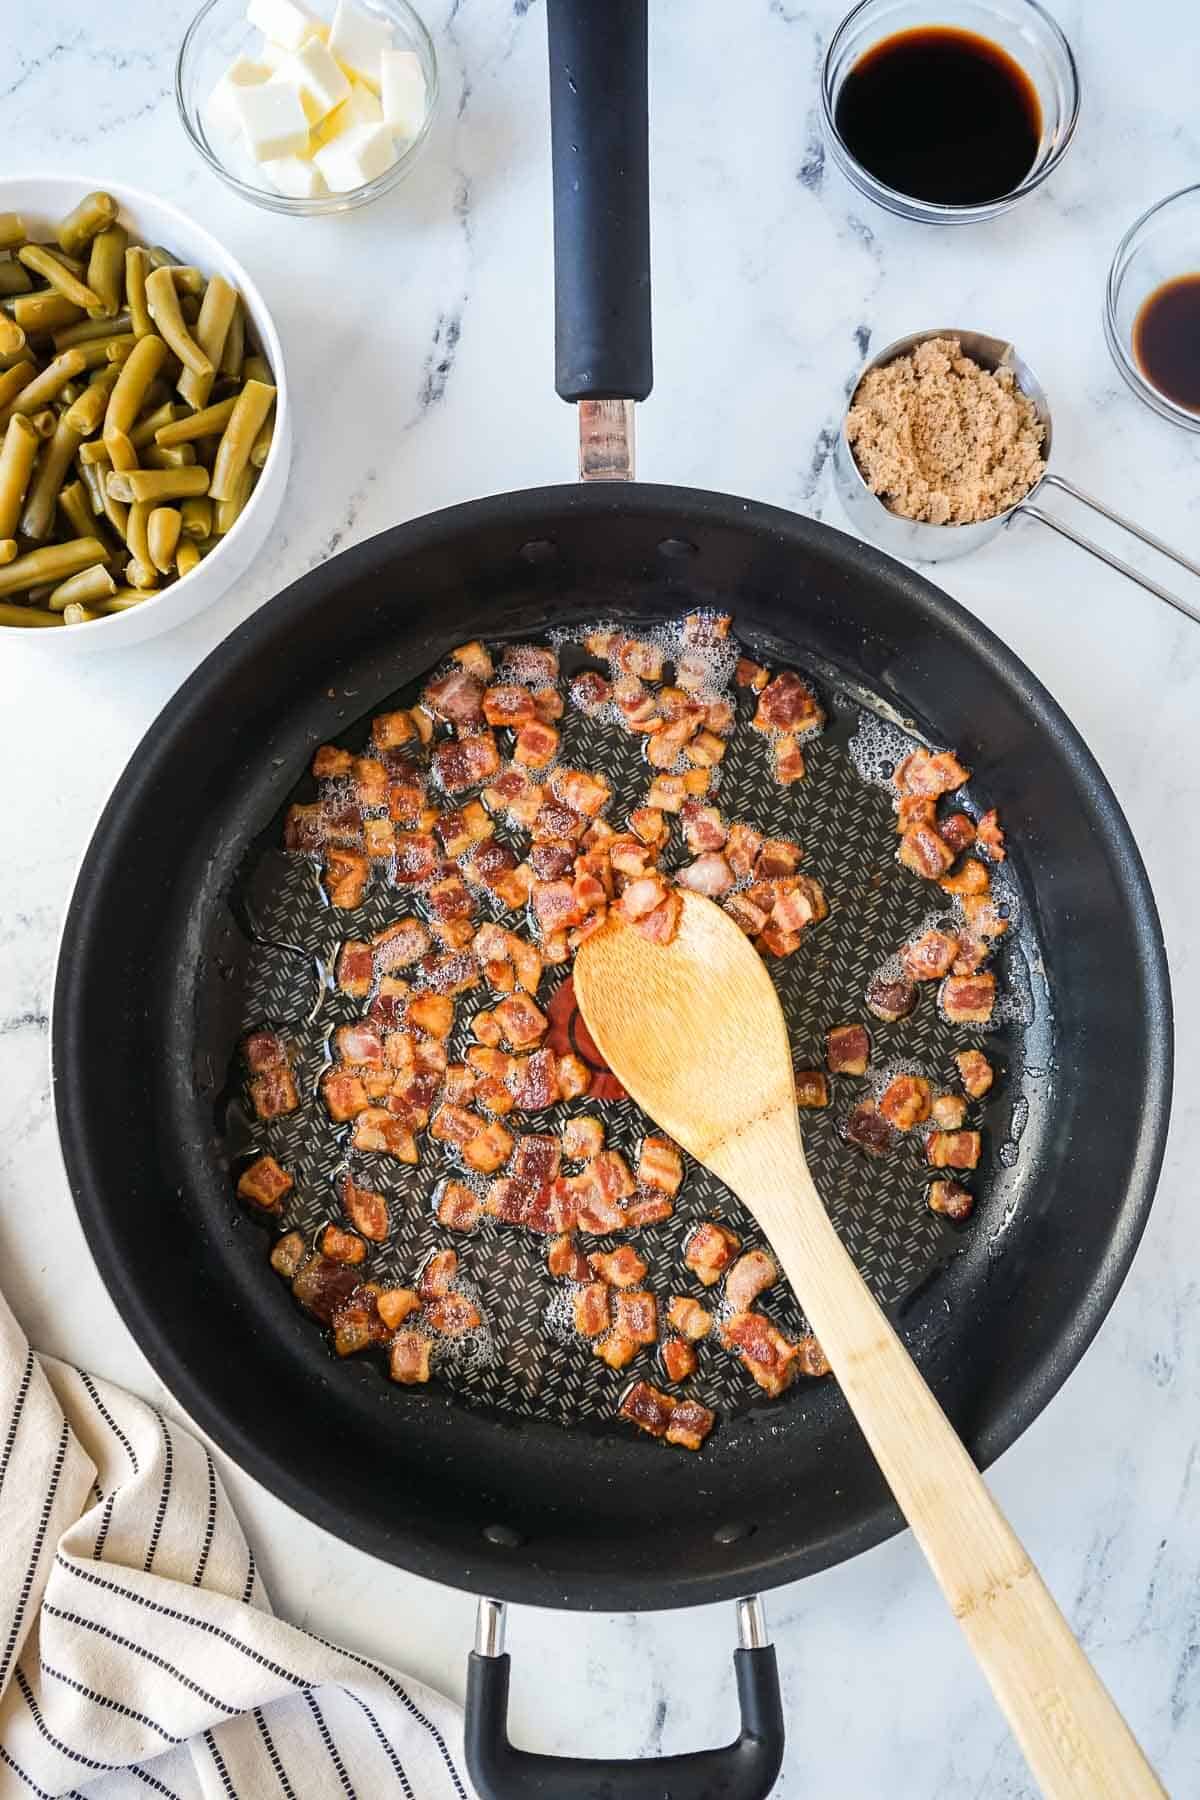 Pieces of bacon cooking in a large skillet with a wooden spoon.